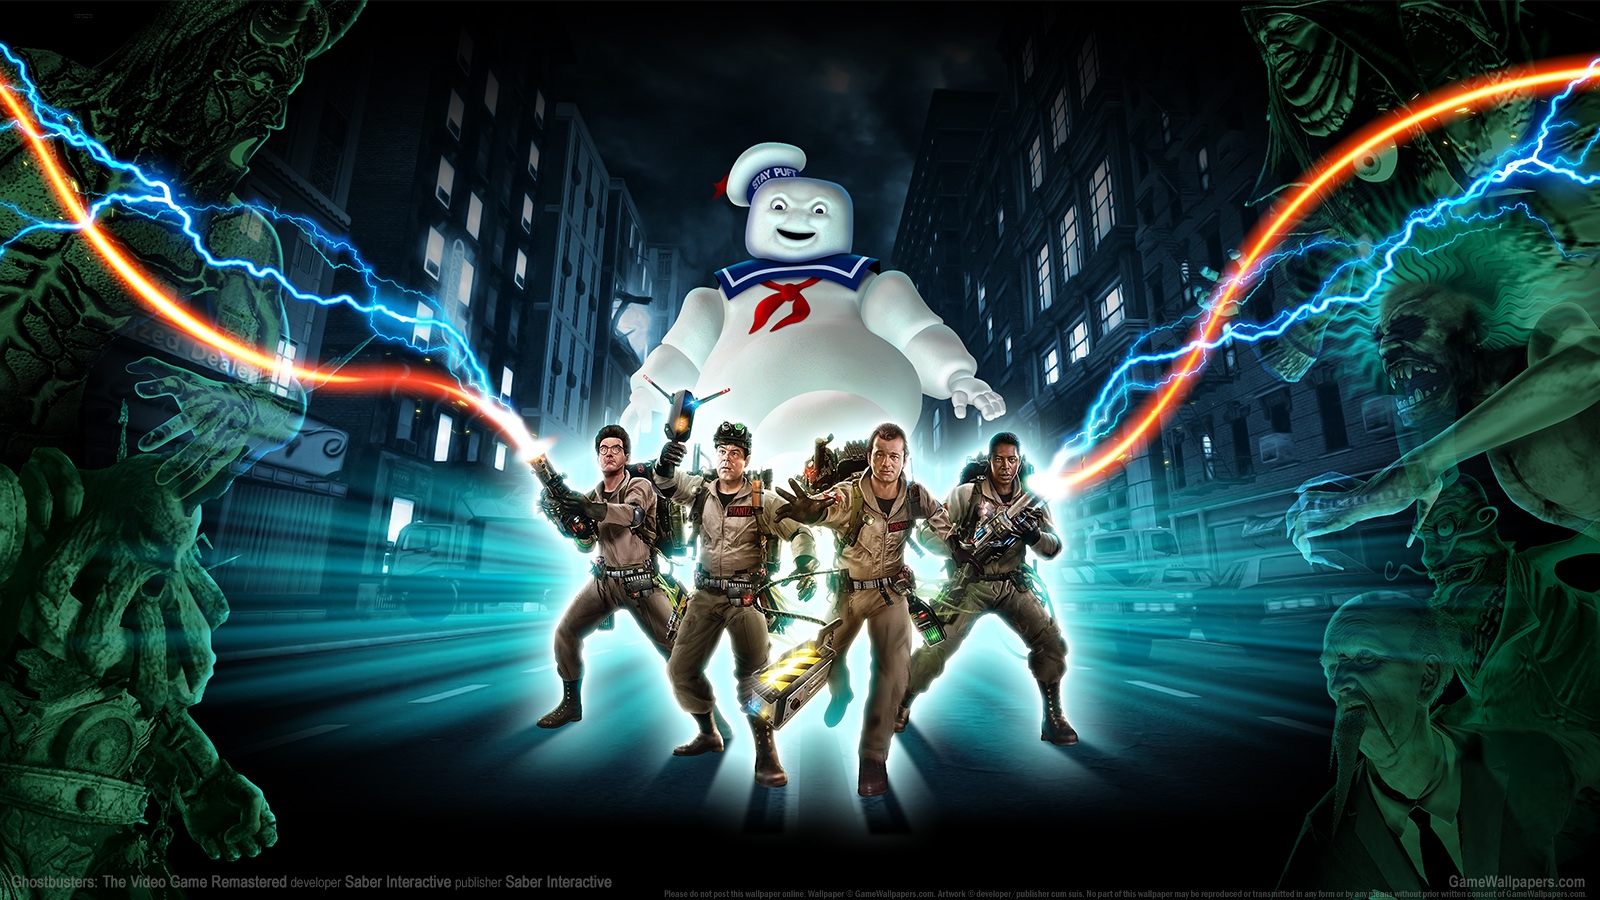 Ghostbusters: The Video Game Remastered 1600x900 wallpaper or background 01